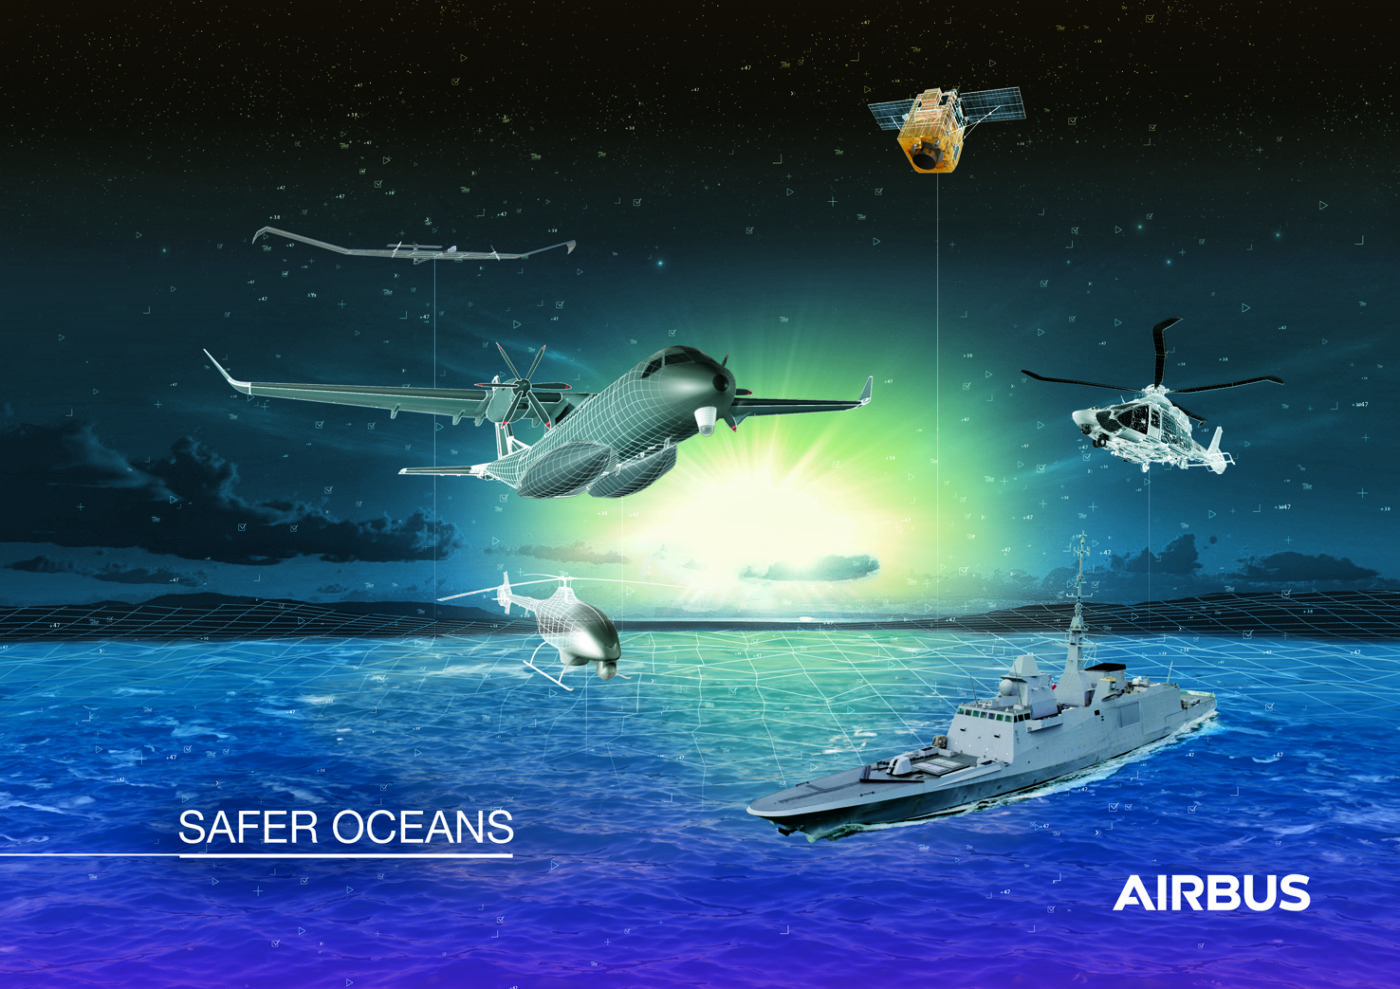 Airbus will be showcasing a myriad of smart solutions for safer oceans at this year’s Euronaval in Paris.